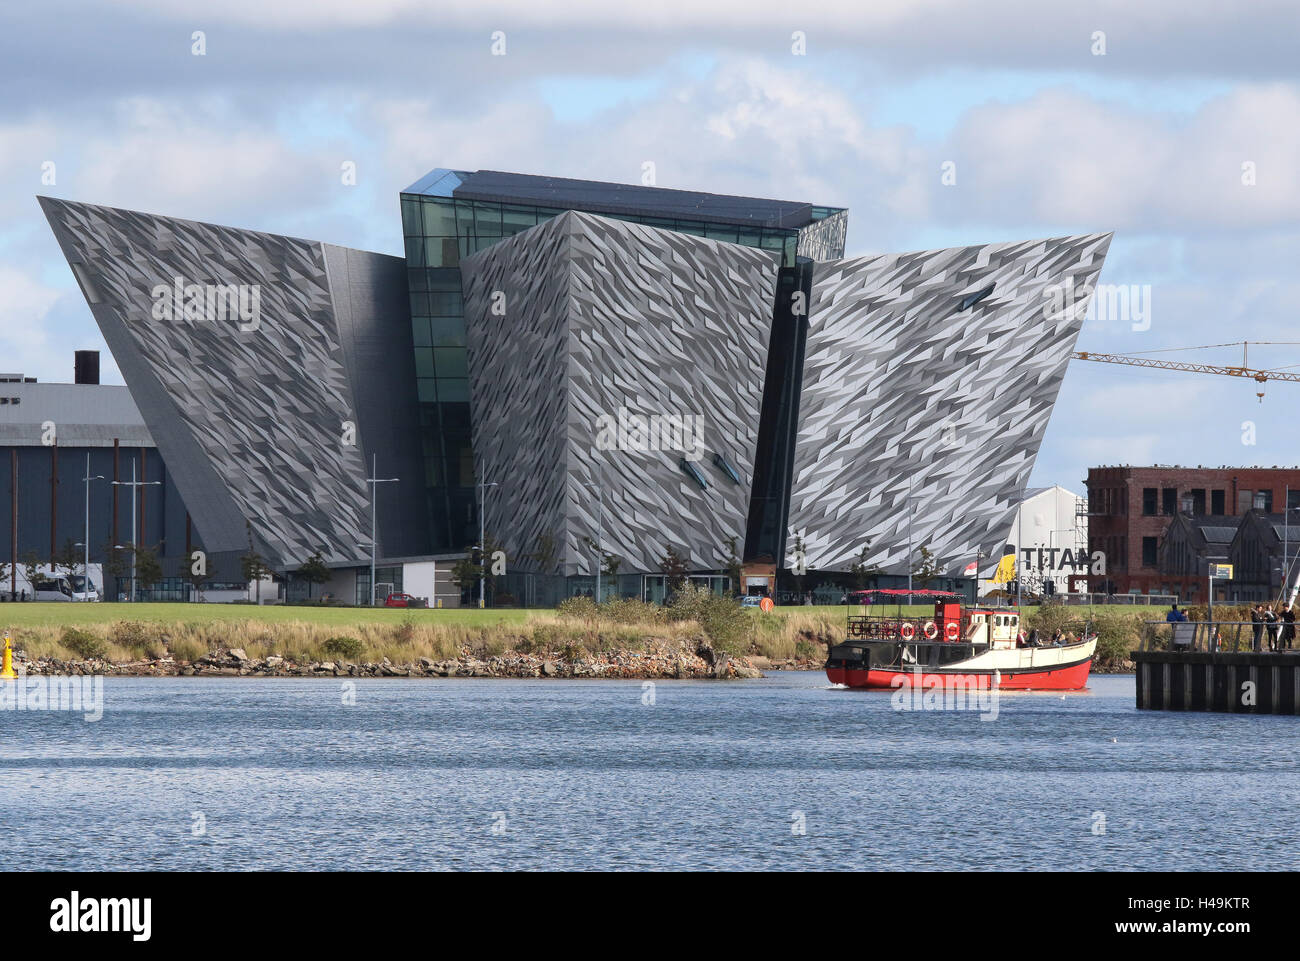 The Titanic Building  in Belfast's Titanic Quarter.In the foreground is the 'Mona', a boat used for Titanic Boat Tours. Stock Photo